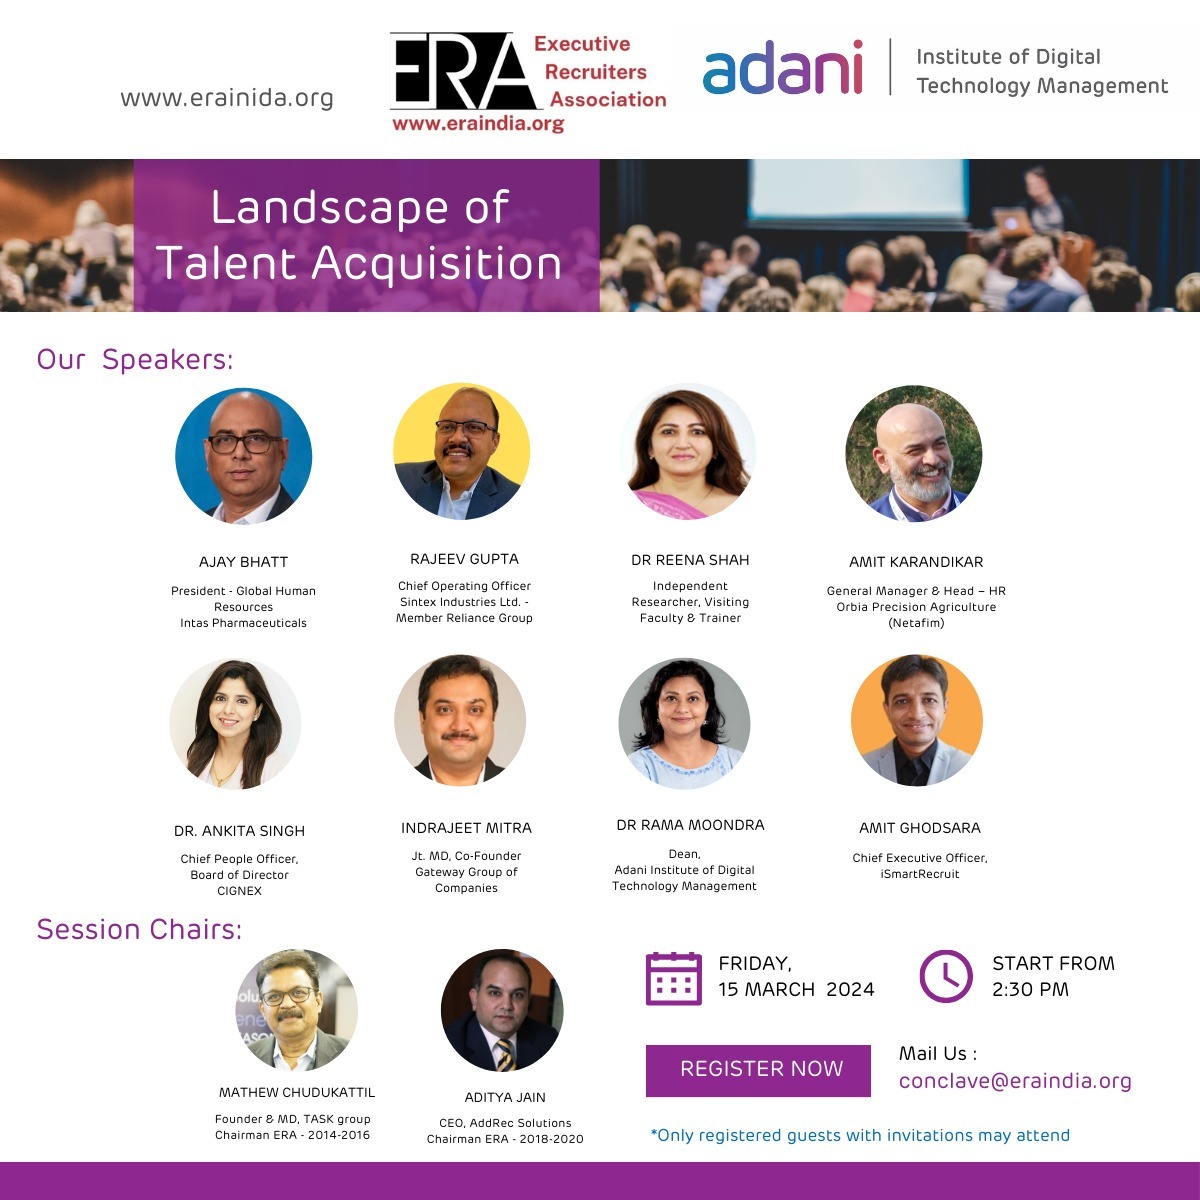 Landscape of talent acquisition 2024 organised by ERA -Executive Recruiters Association at Adani Institute of Digital Technology Management on 15th March 2024.